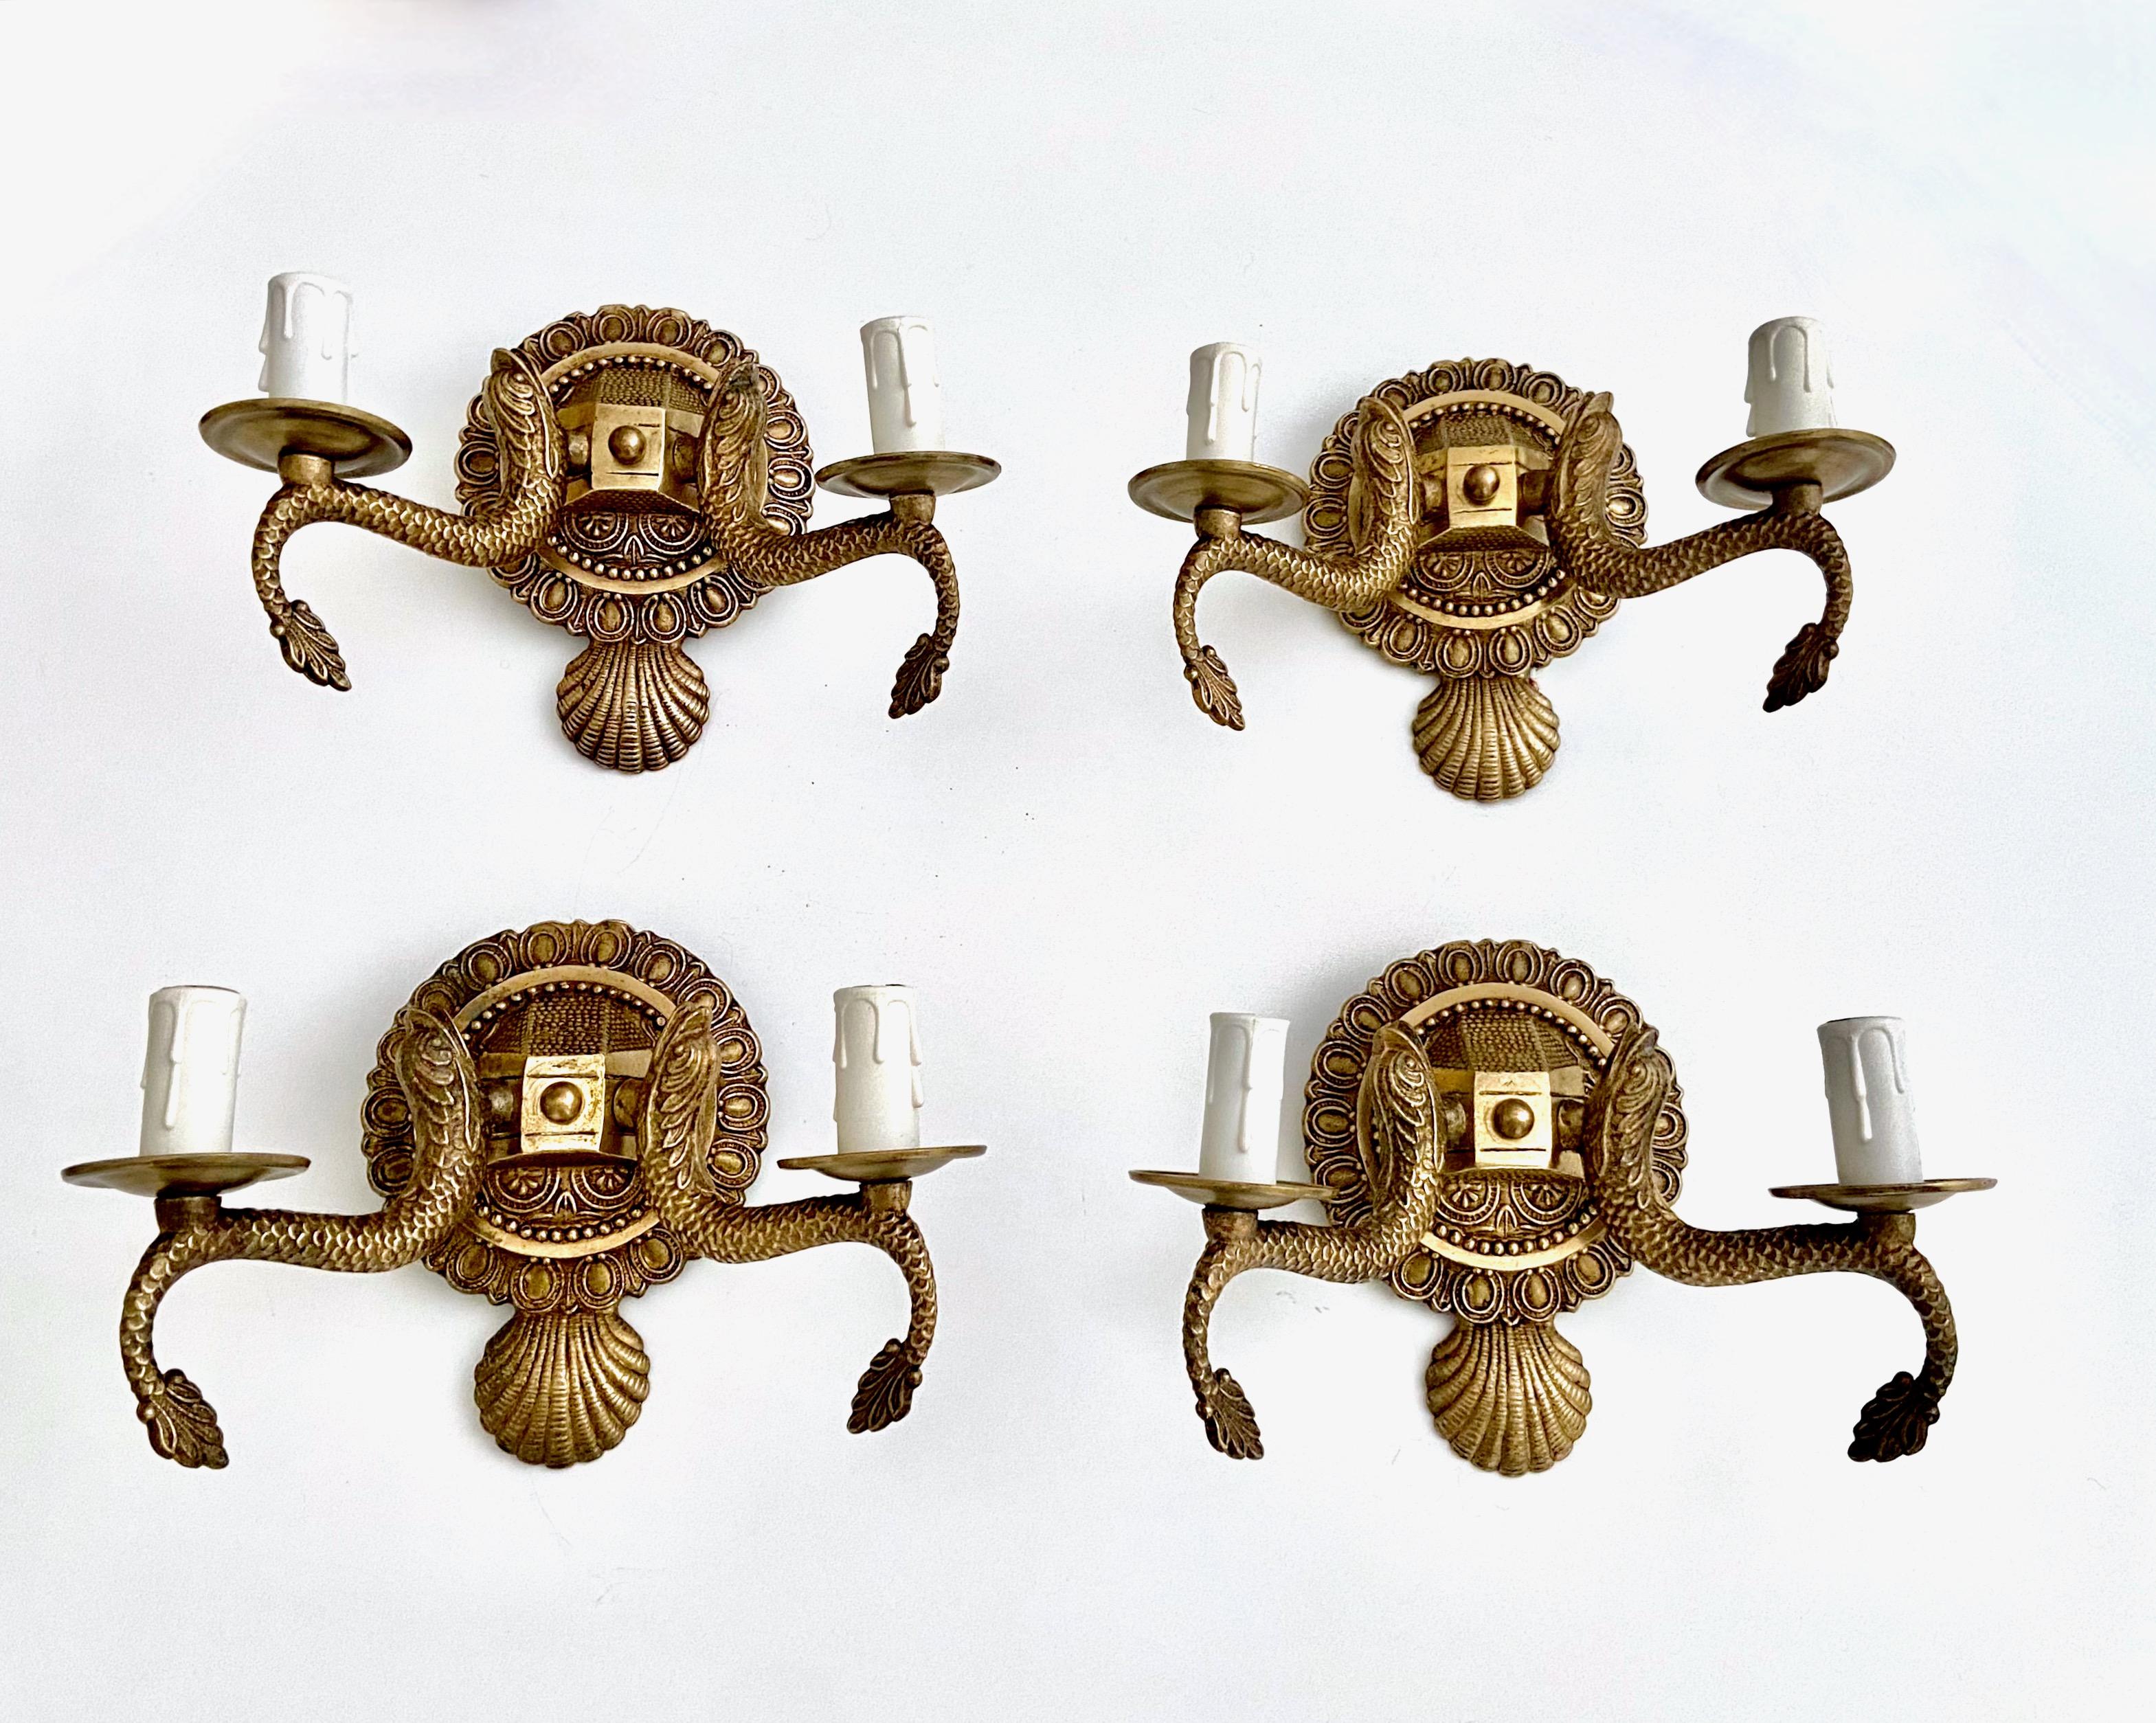 Set of four (4) European two-light neoclassic style brass wall sconces with dolphin and claim shell motif. Expertly crafted with nice quality detailing throughout. Newly wired with new candelabra sockets. Additional pairs available under separate